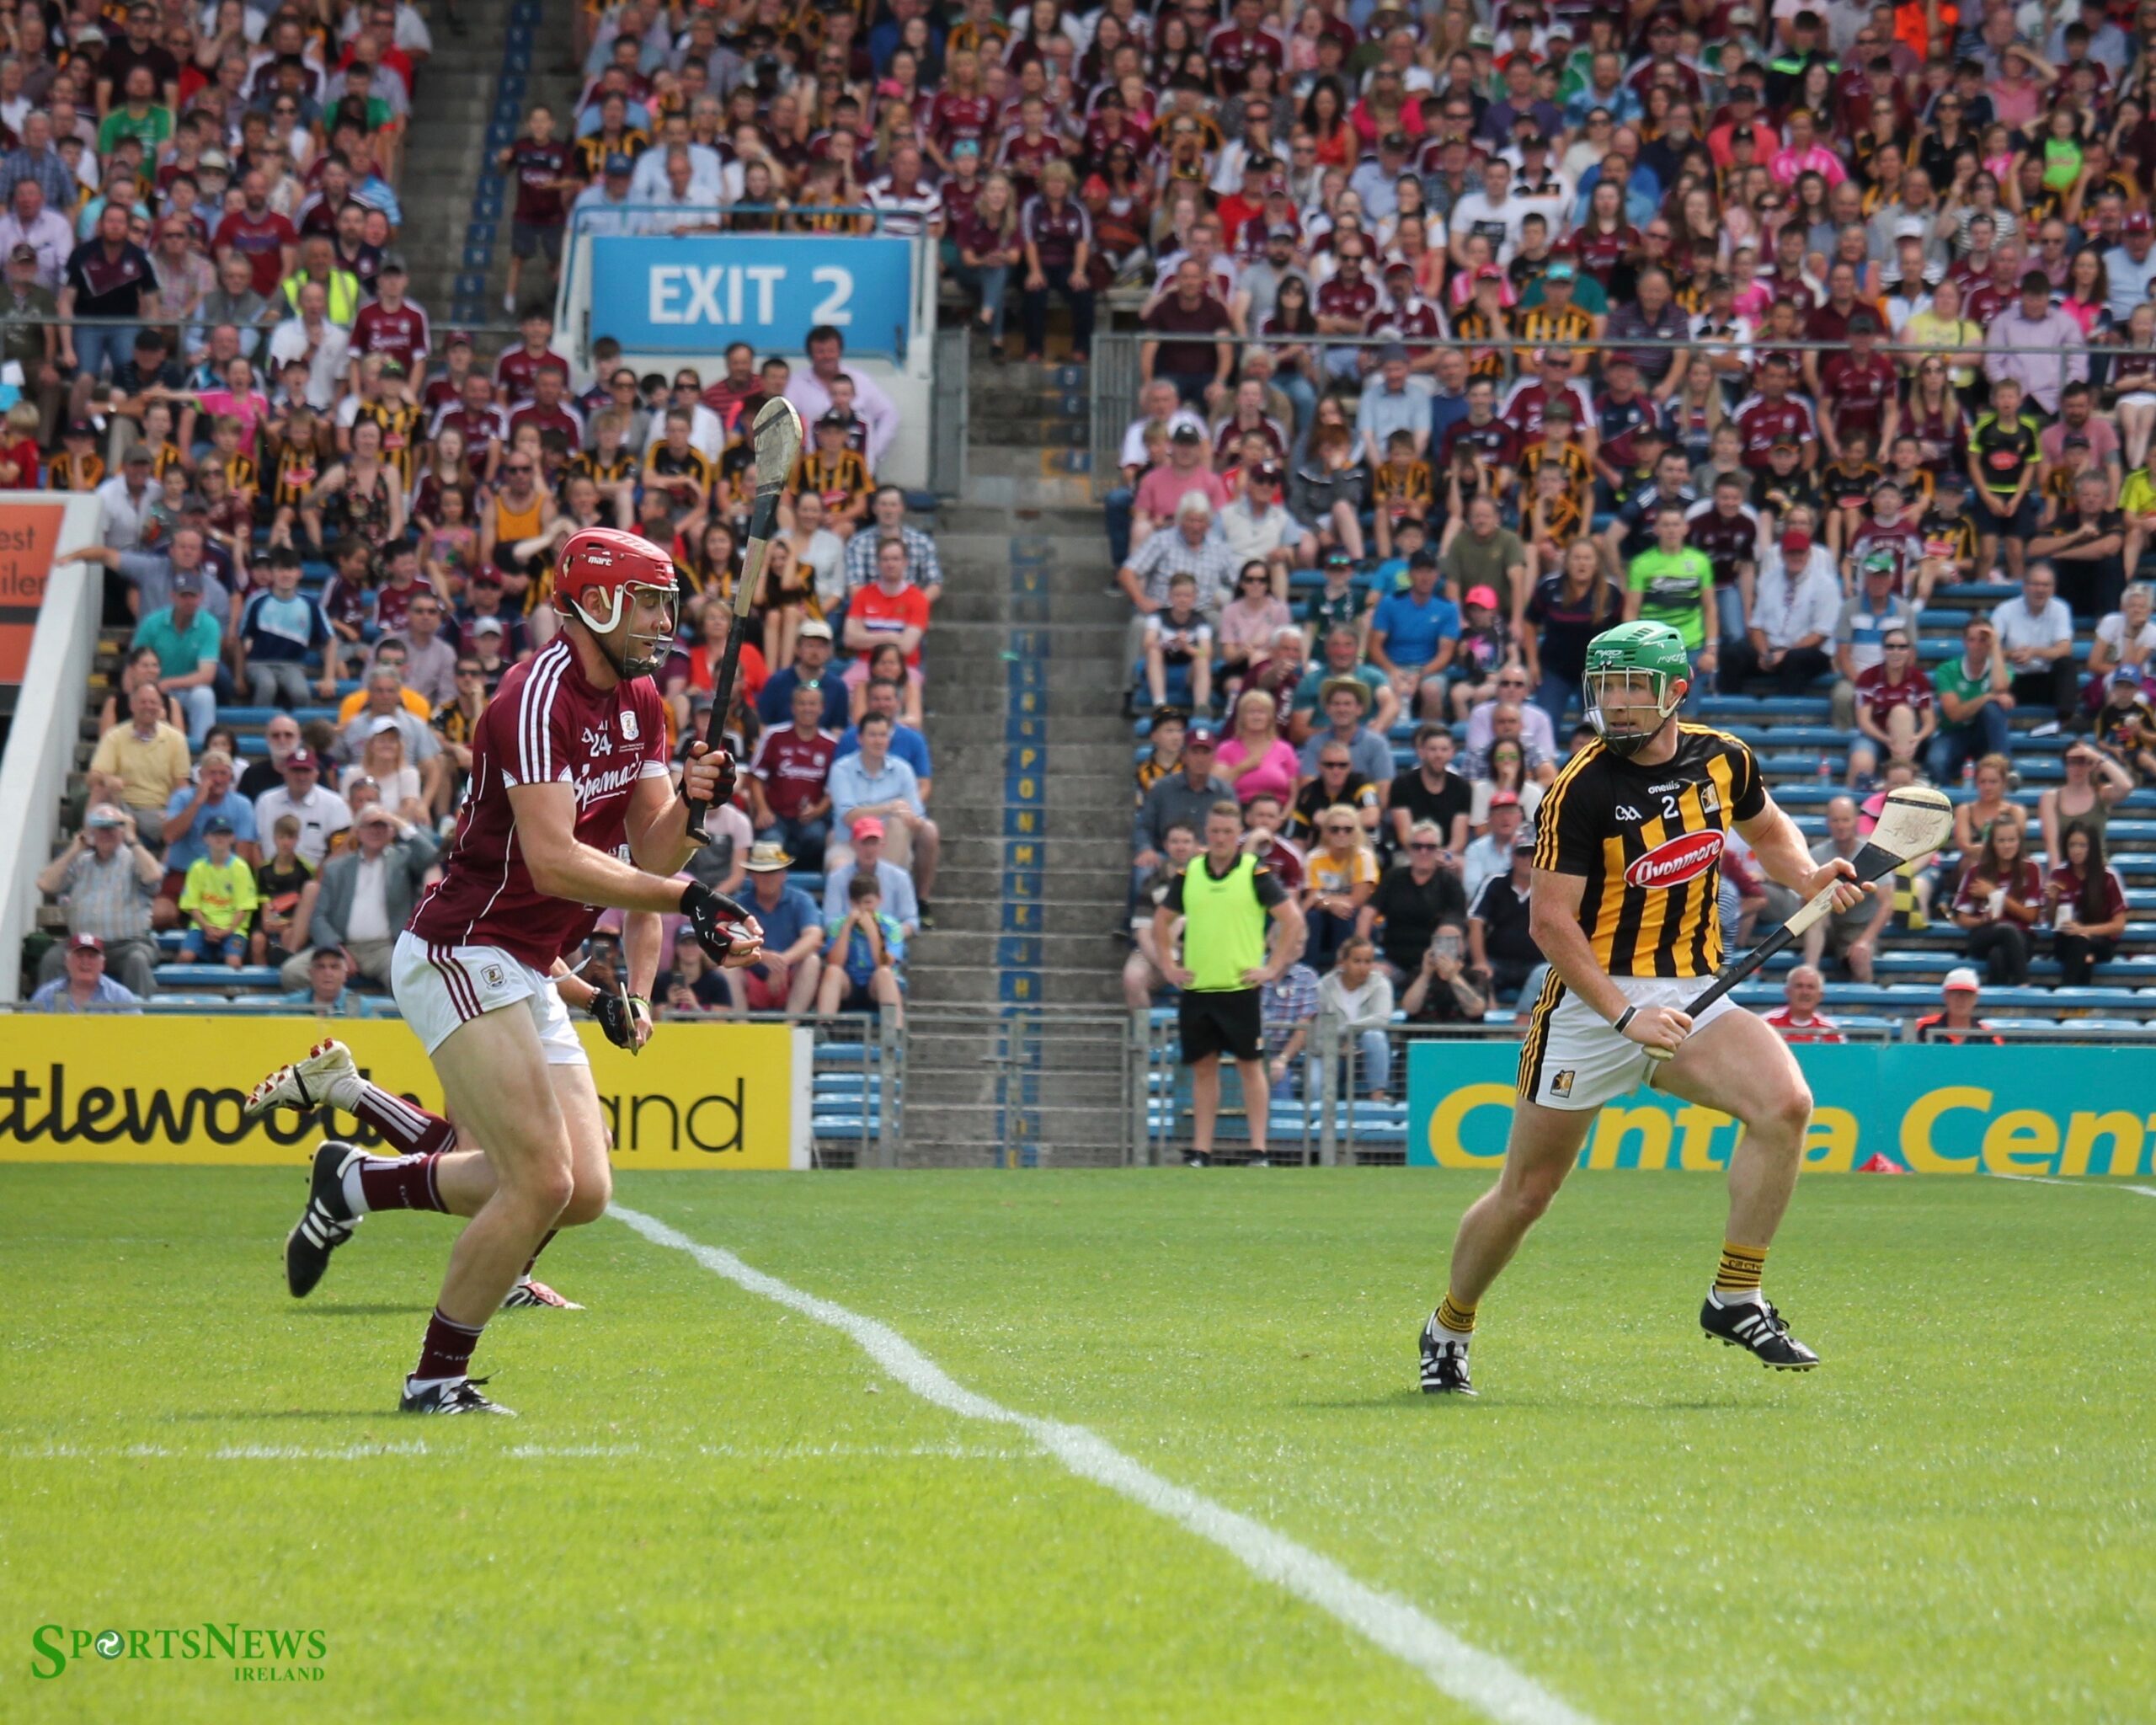 Betting on Hurling: 10 Quick Steps to Get Started